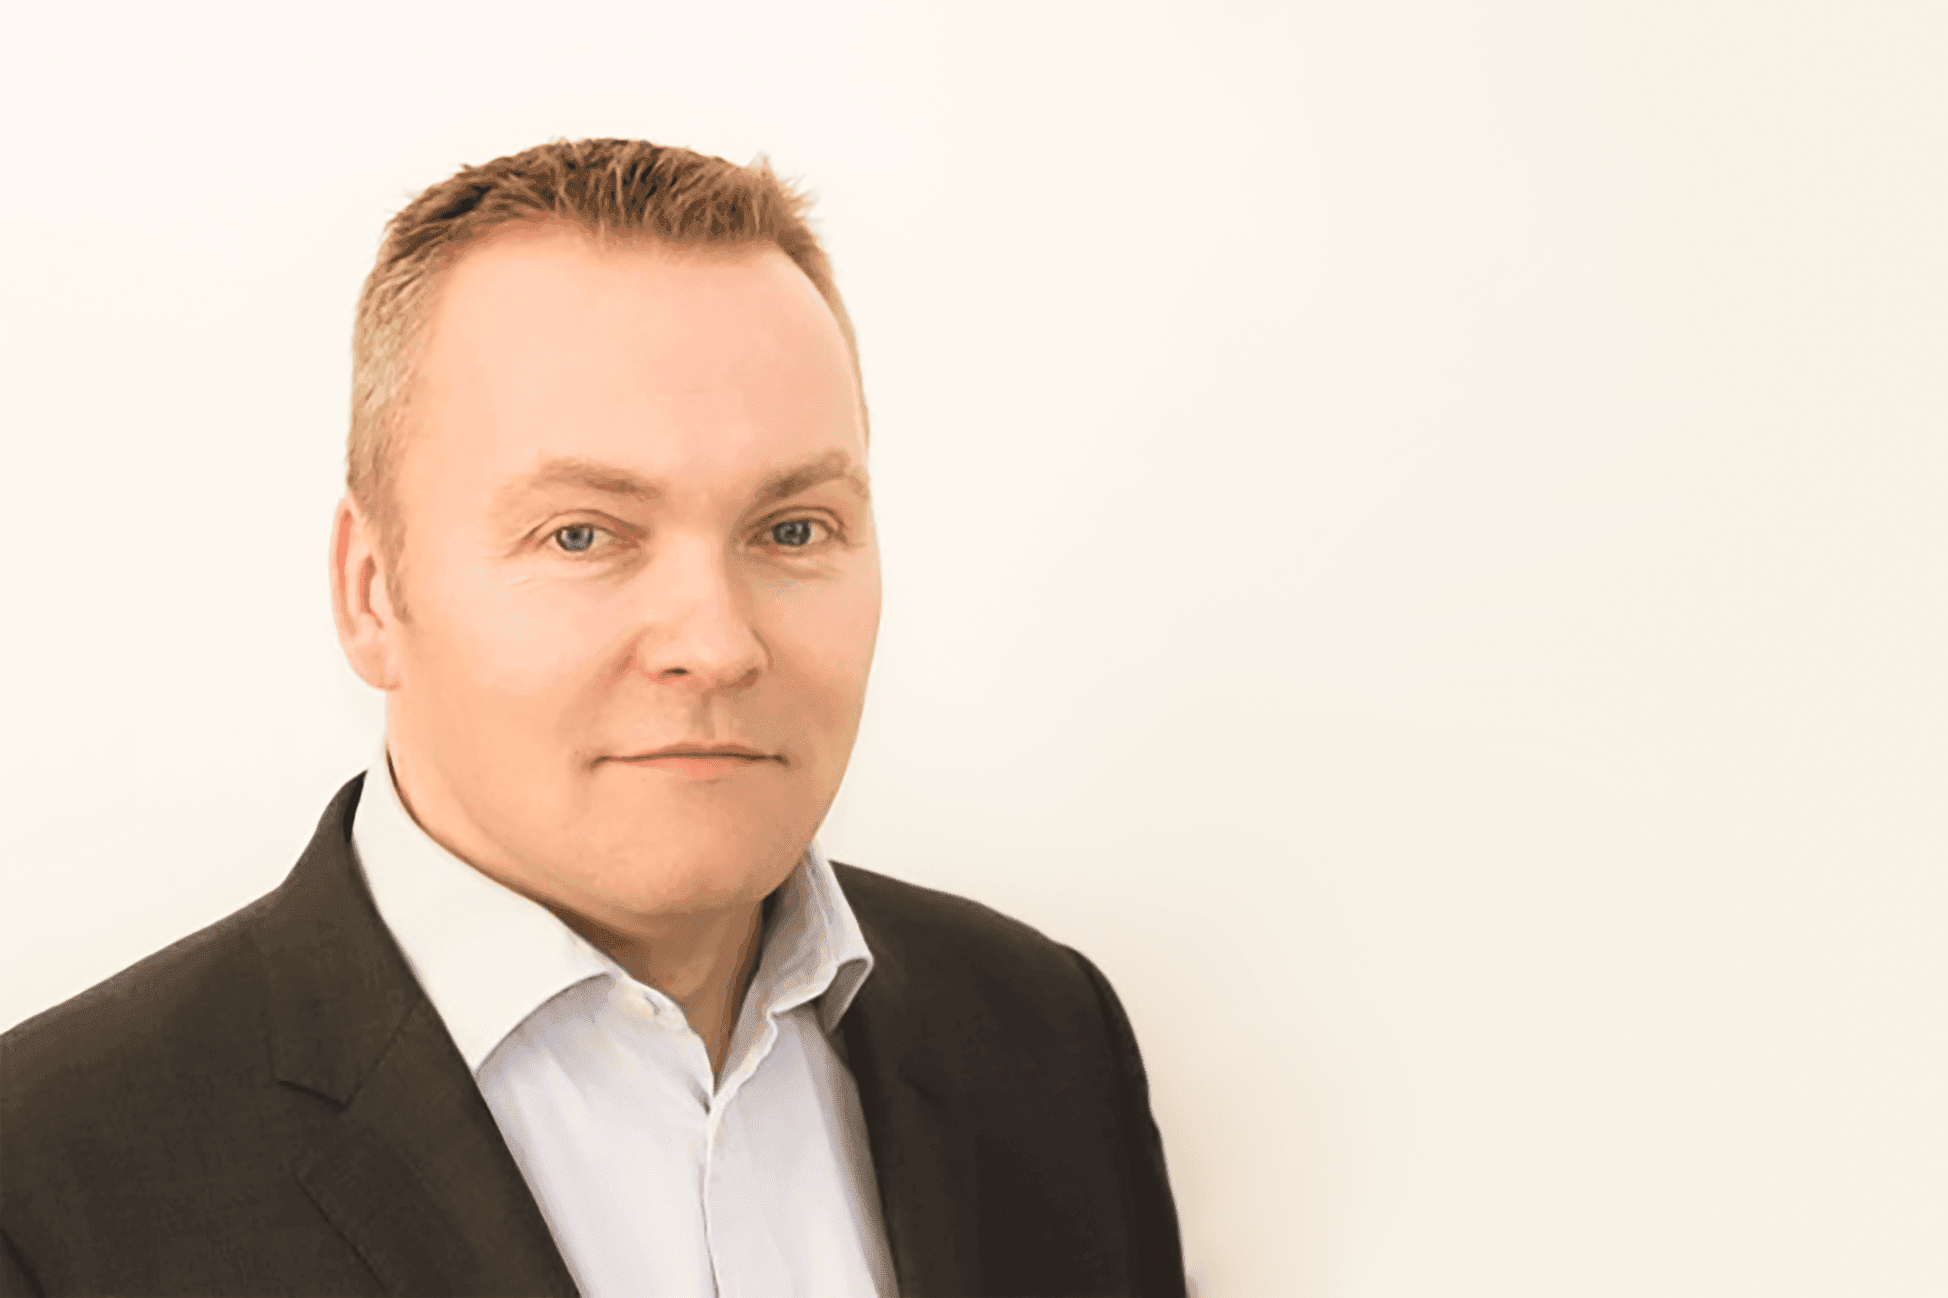 Tim Rowe Joins AlfaPeople as Delivery Director